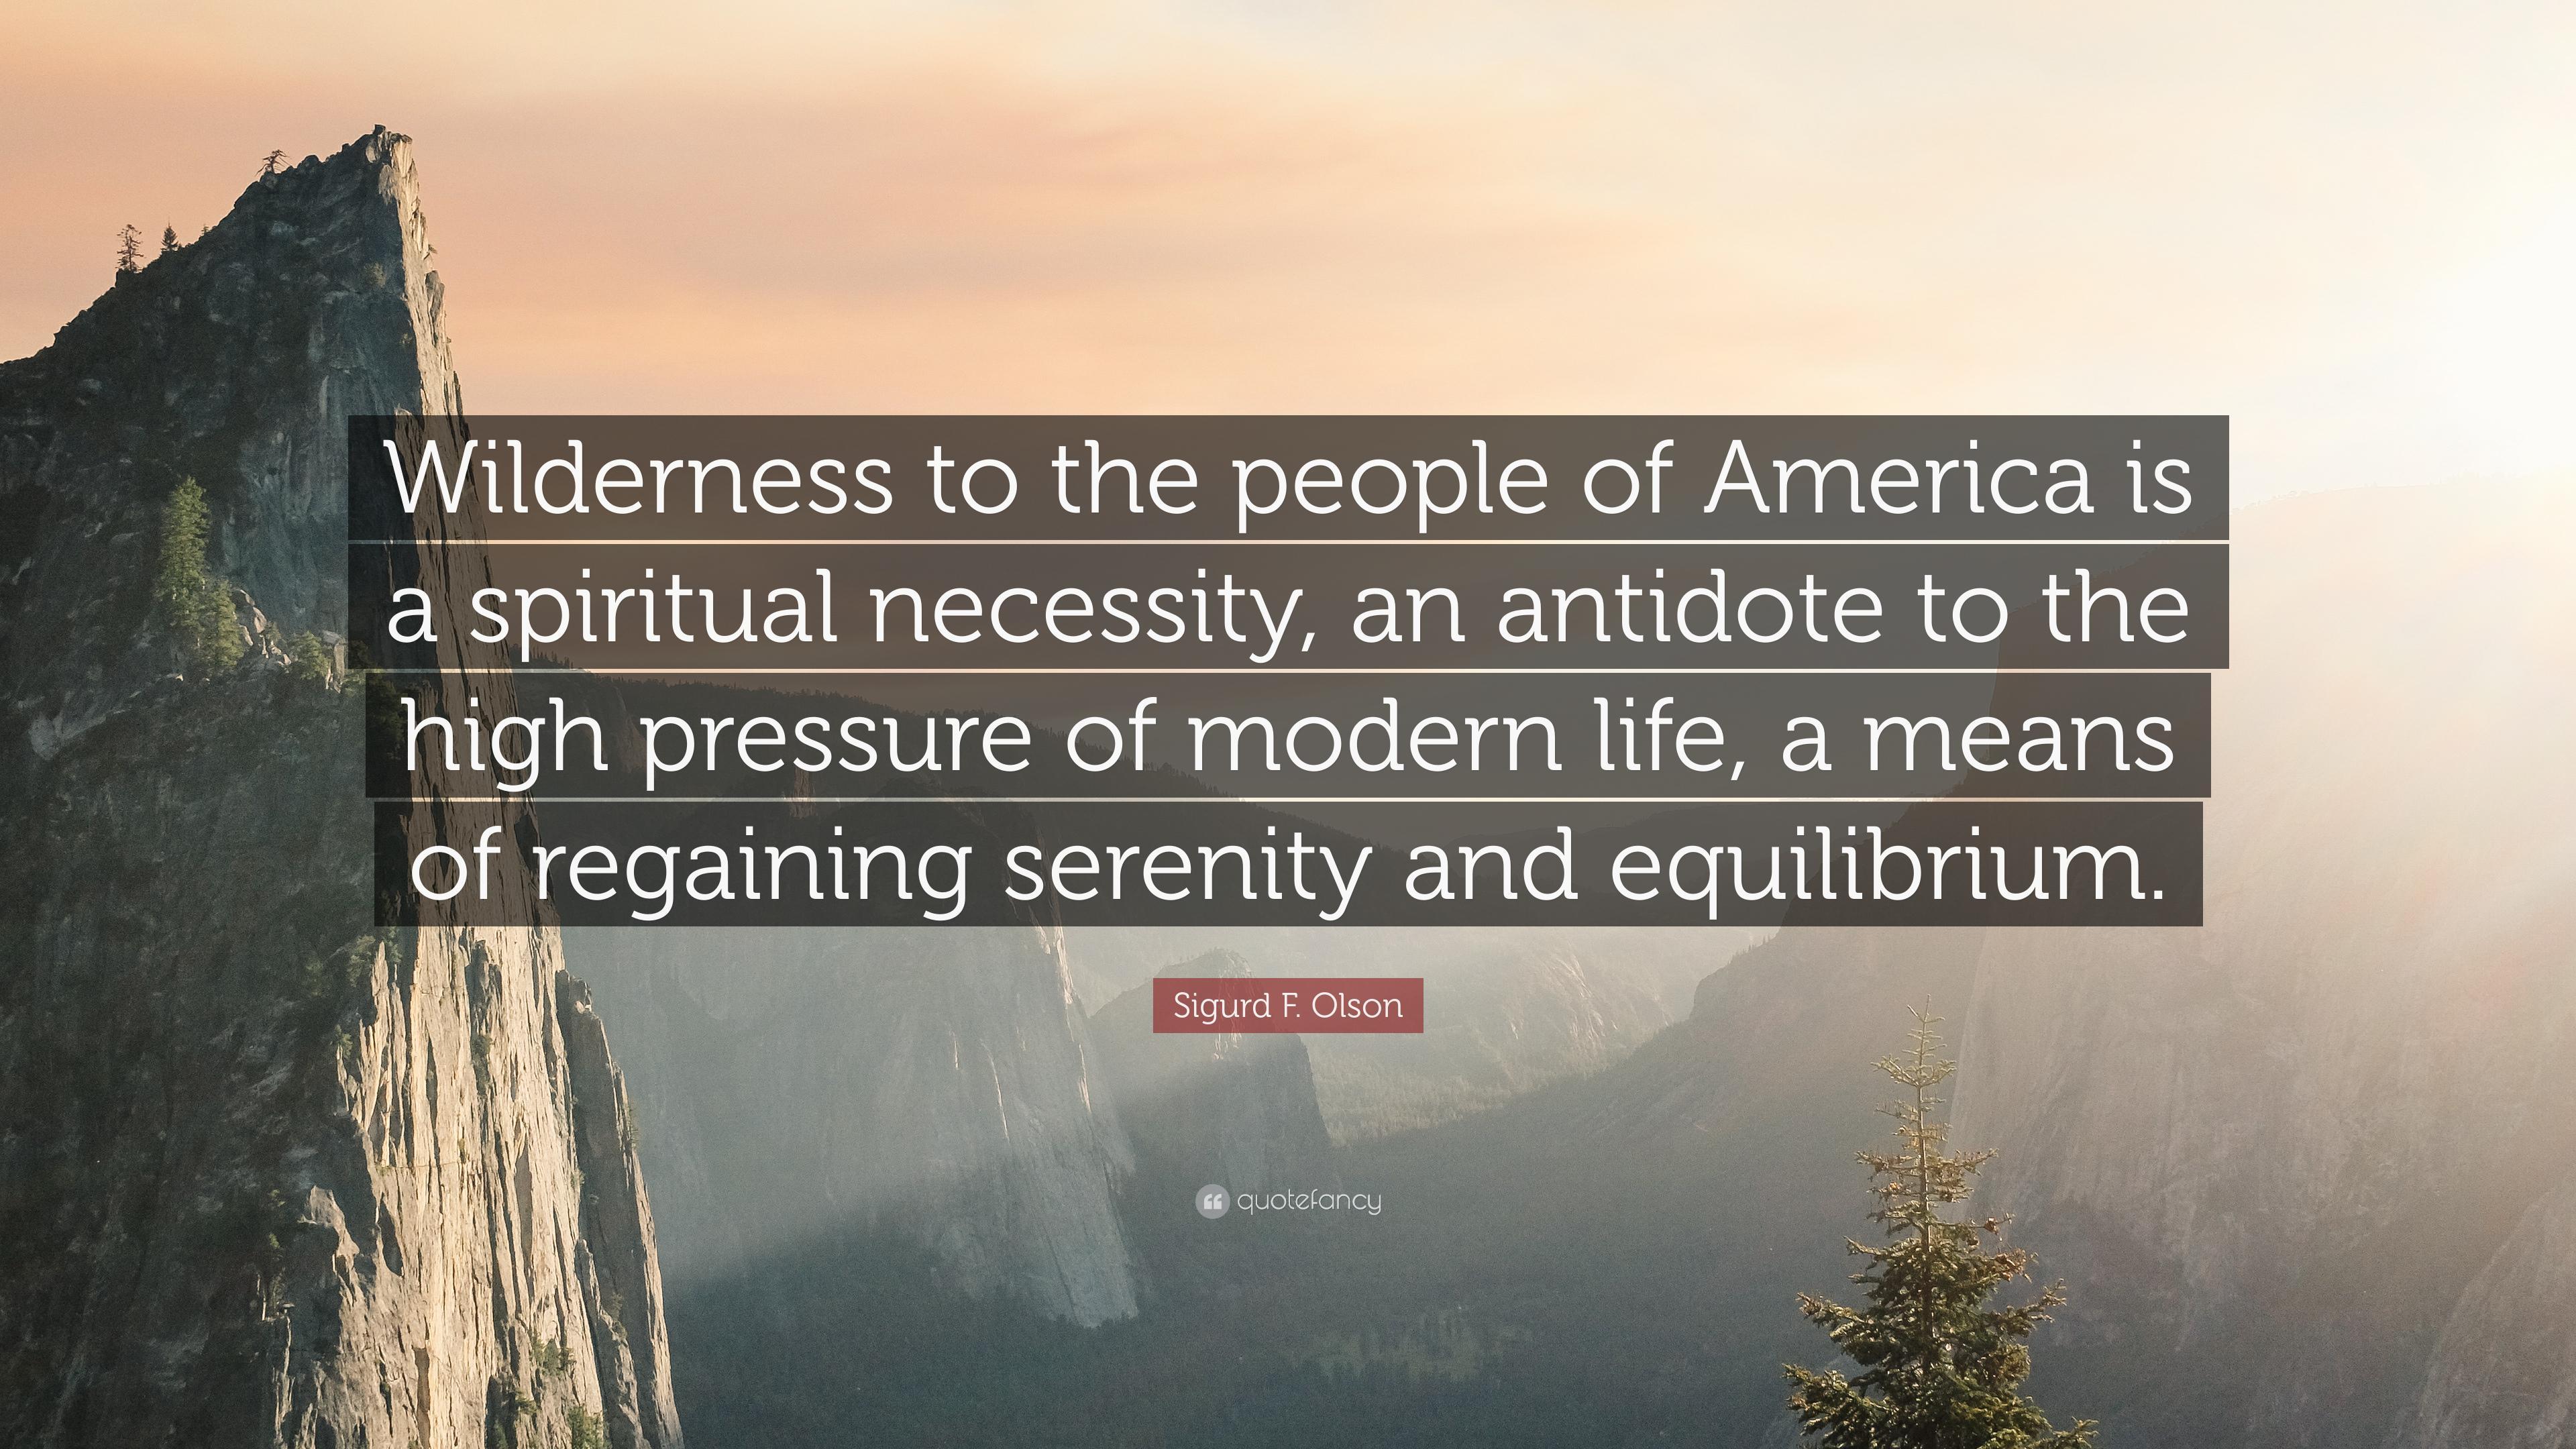 Sigurd F. Olson Quote: “Wilderness to the people of America